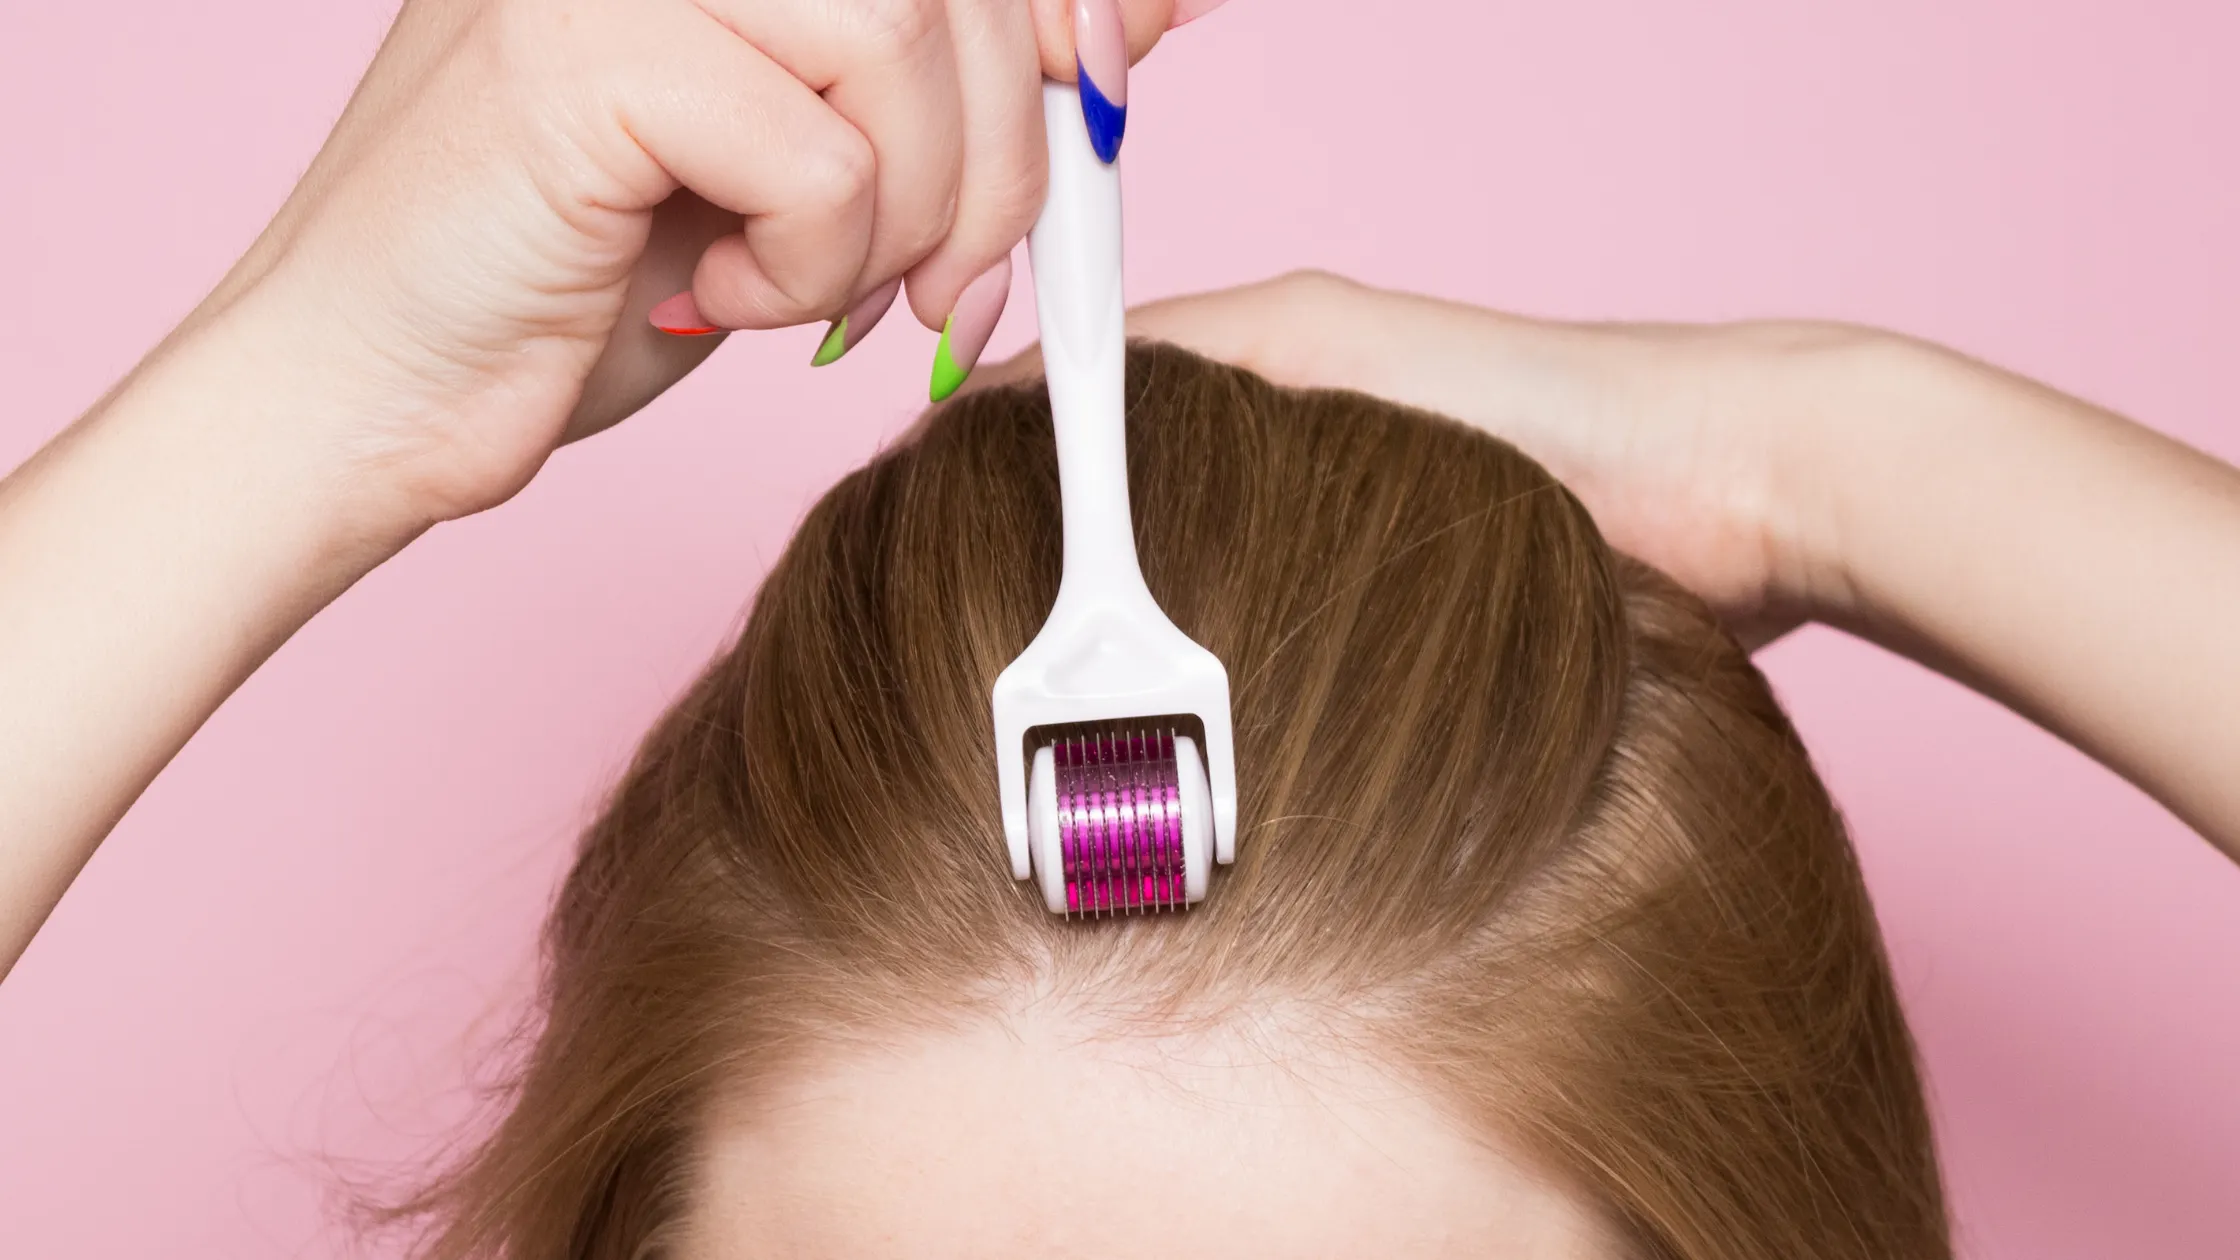 A Guide To Promoting Healthy Hair Growth